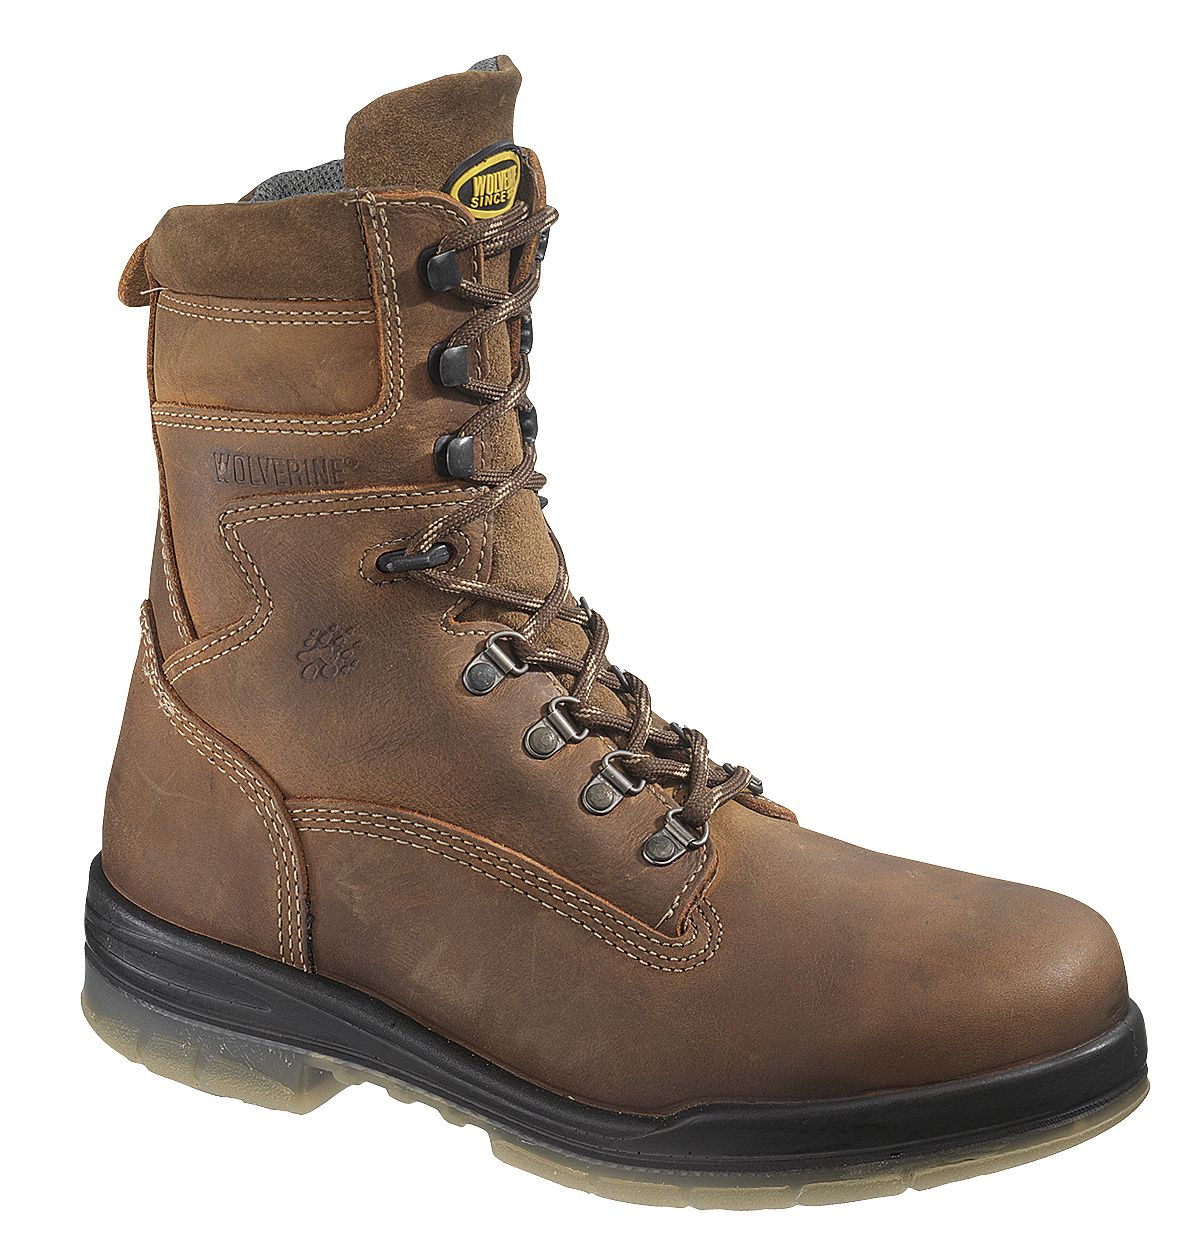 waterproof and insulated work boots